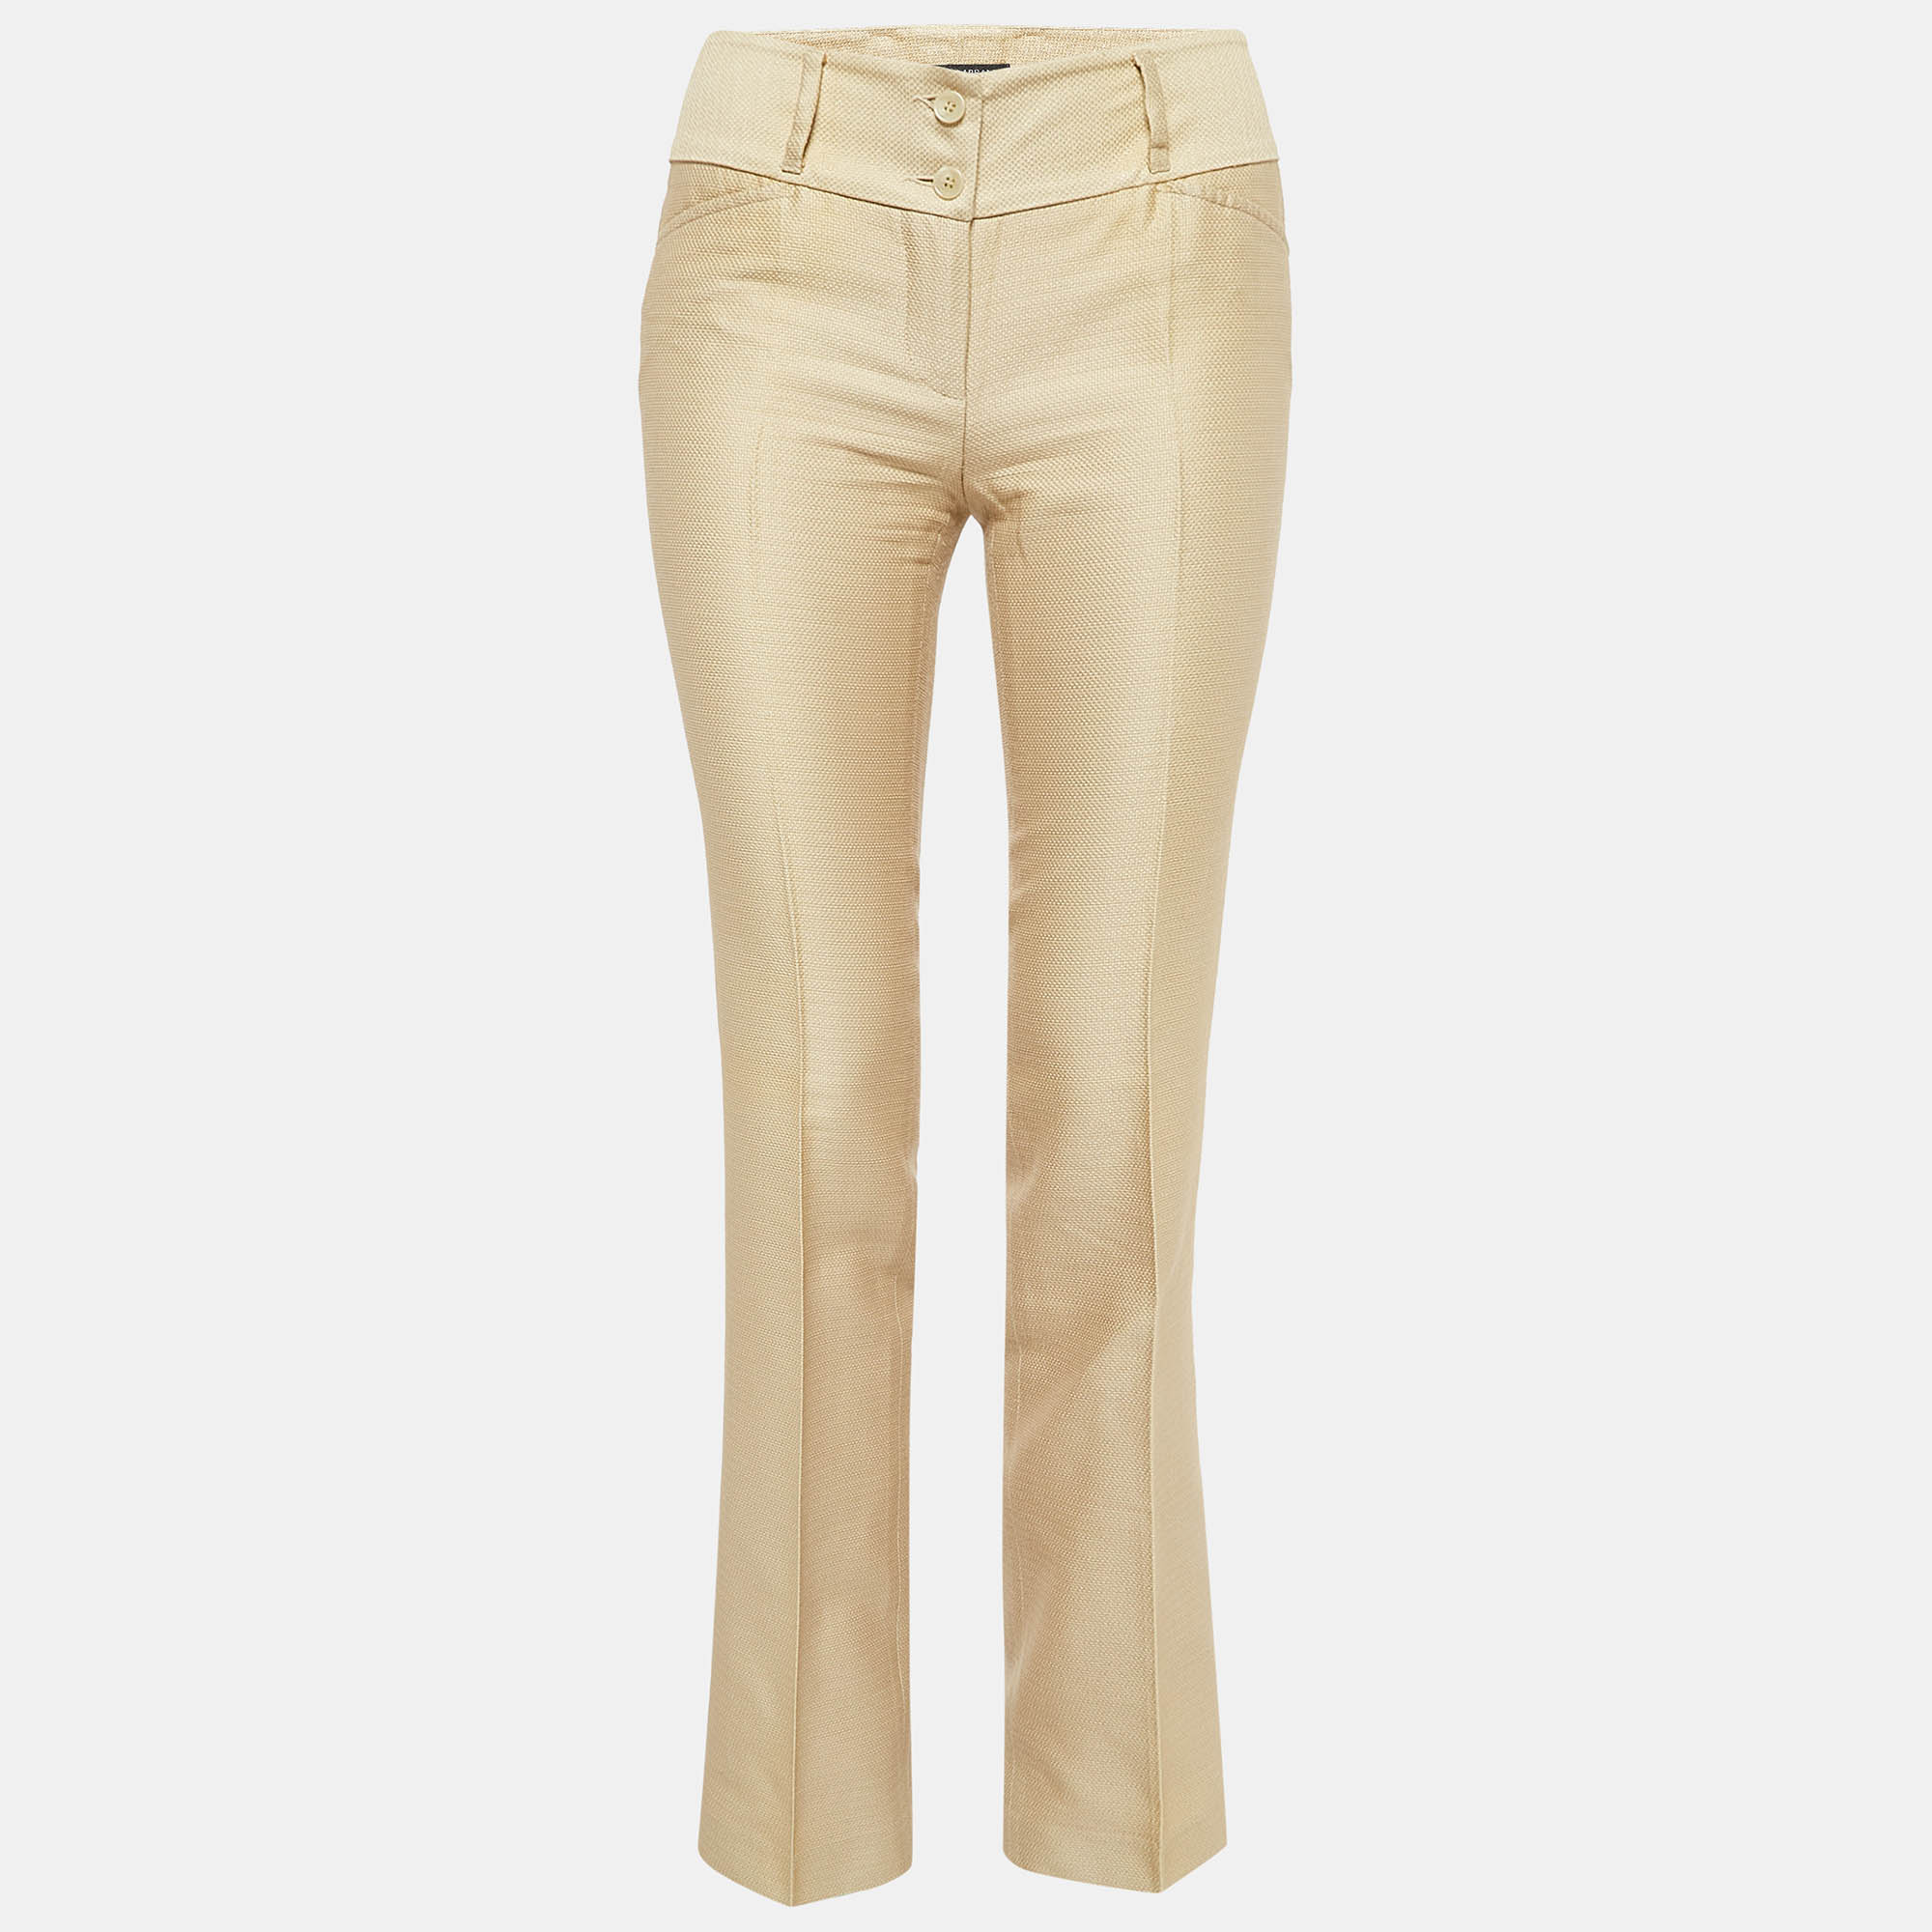 Dolce & gabbana gold cotton and silk trousers s